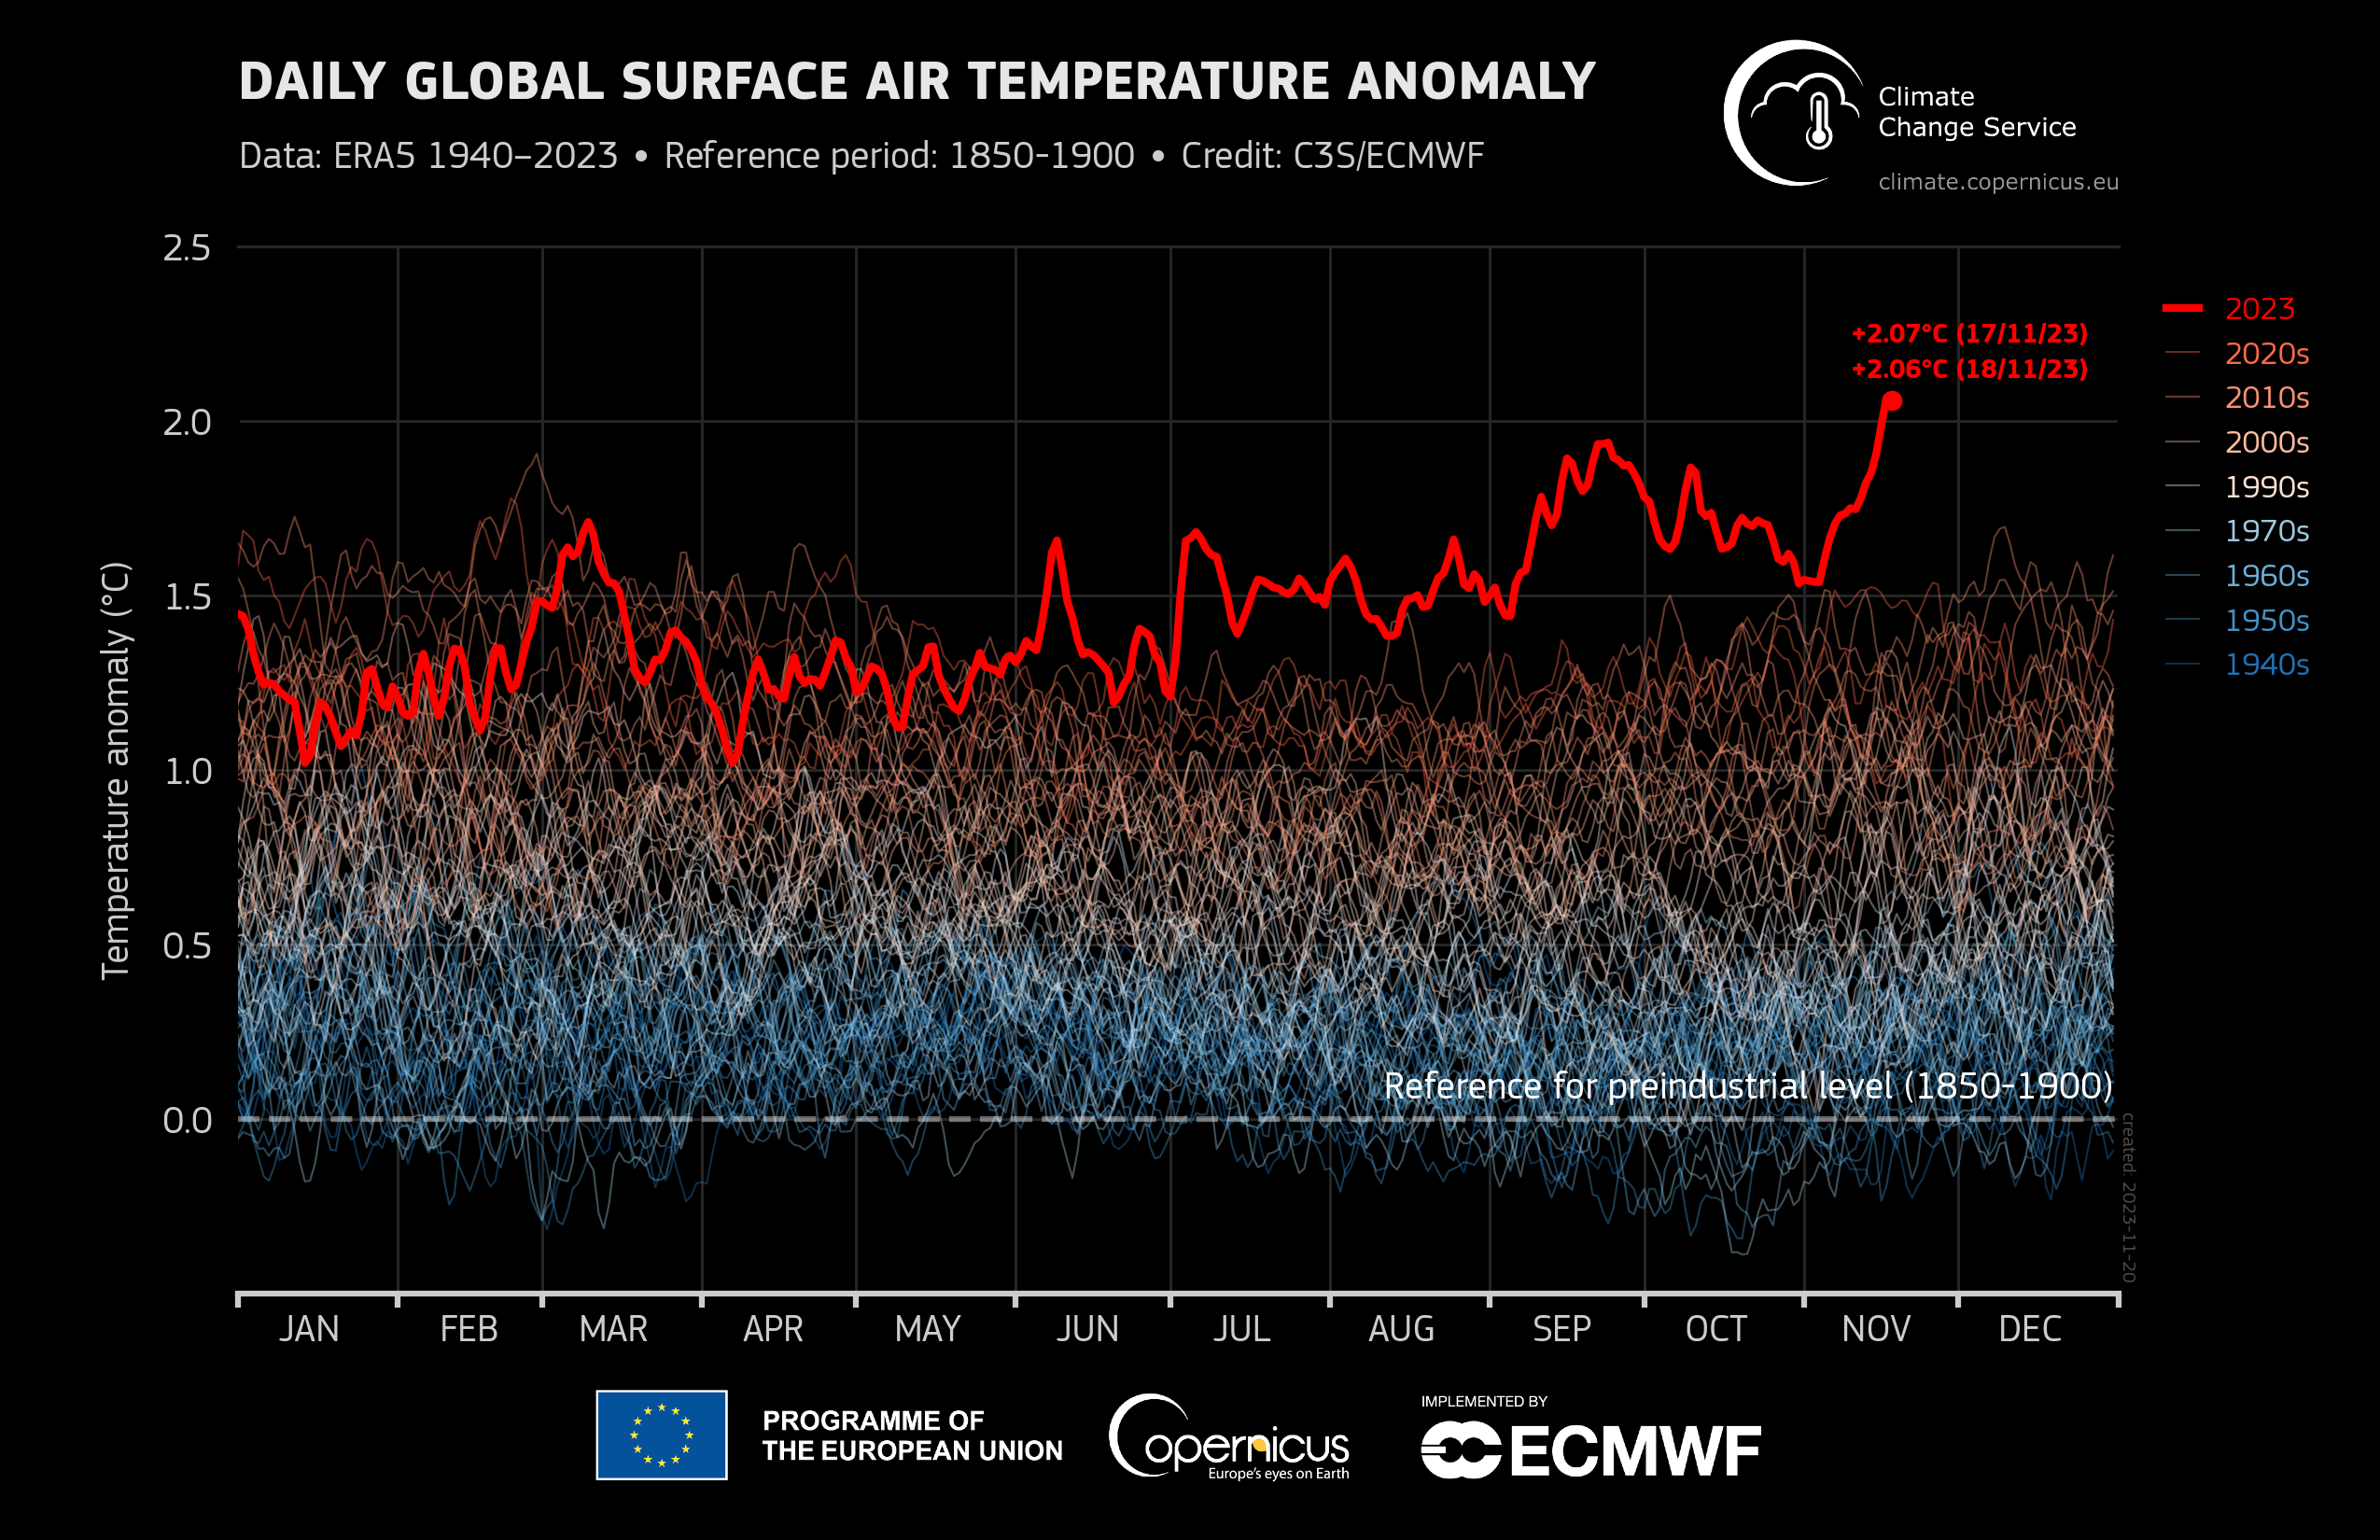 The world temporarily breached 2 degrees Celsius on Friday November 17. 2023 is on track to be the hottest year on record